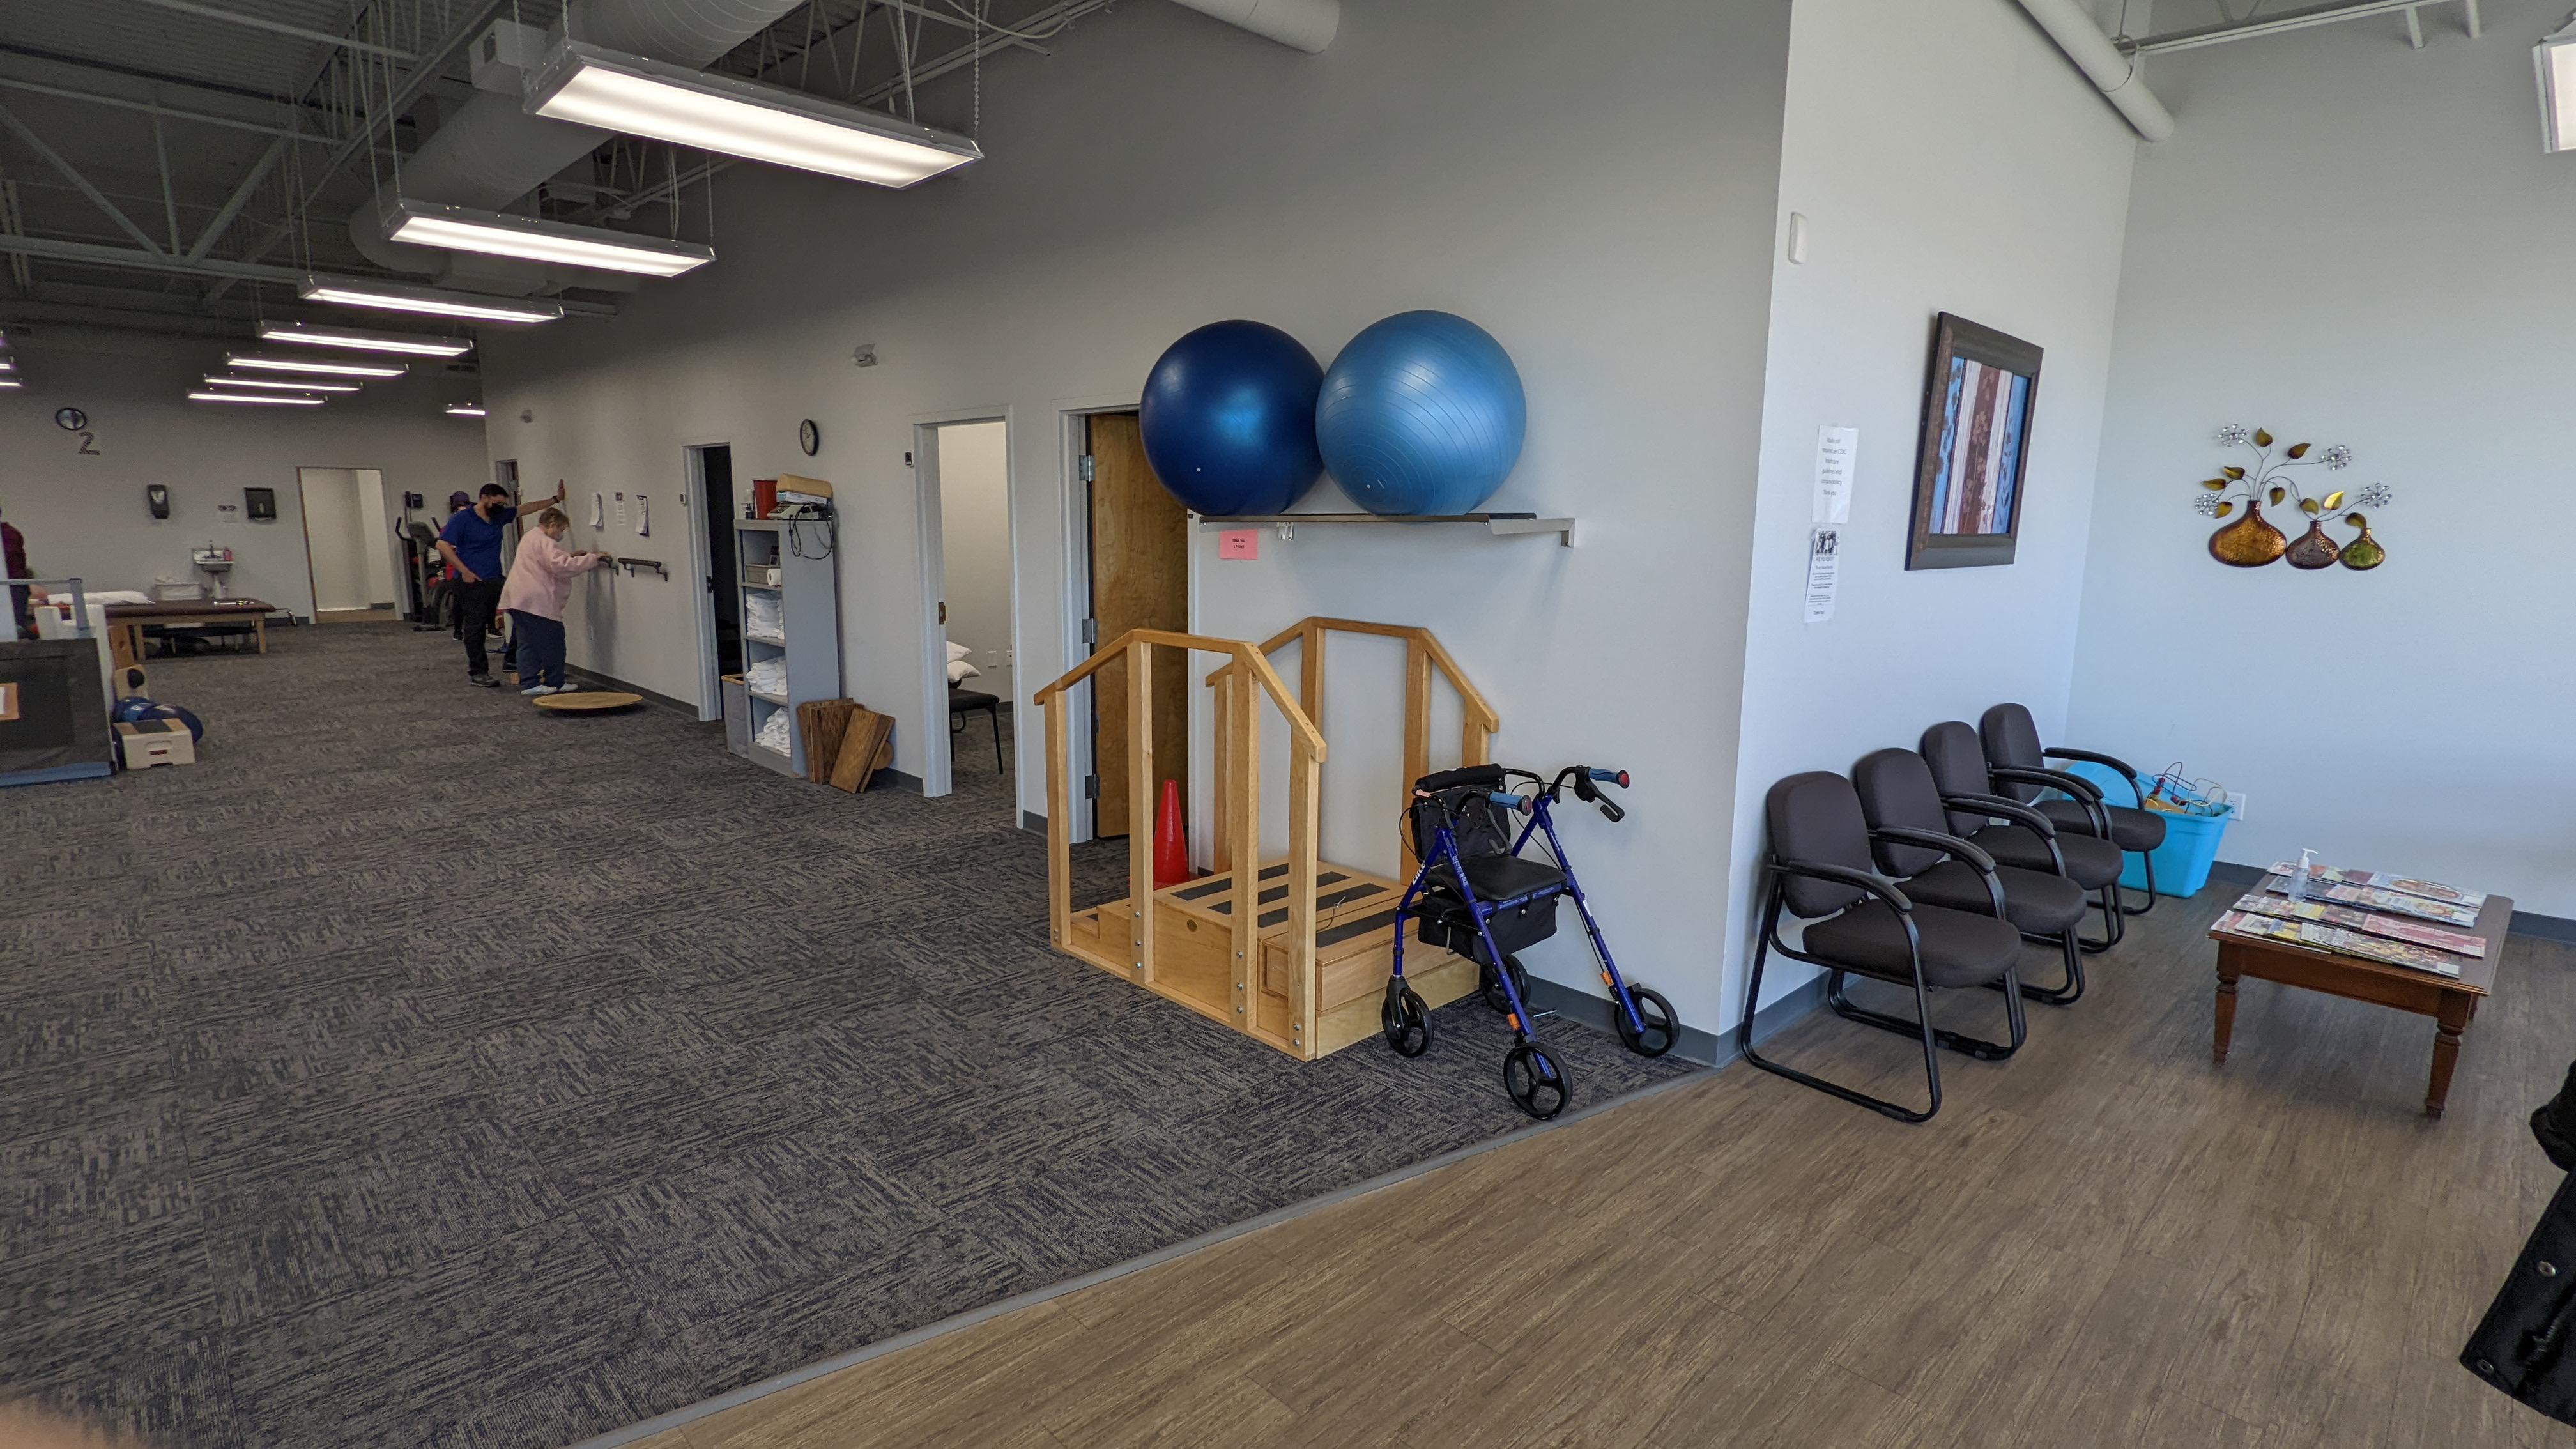 Action Potential Physical Therapy - Colorado Springs, Austin Bluffs Pkwy
4328 Austin Bluffs Parkway
Colorado Springs, CO 80918